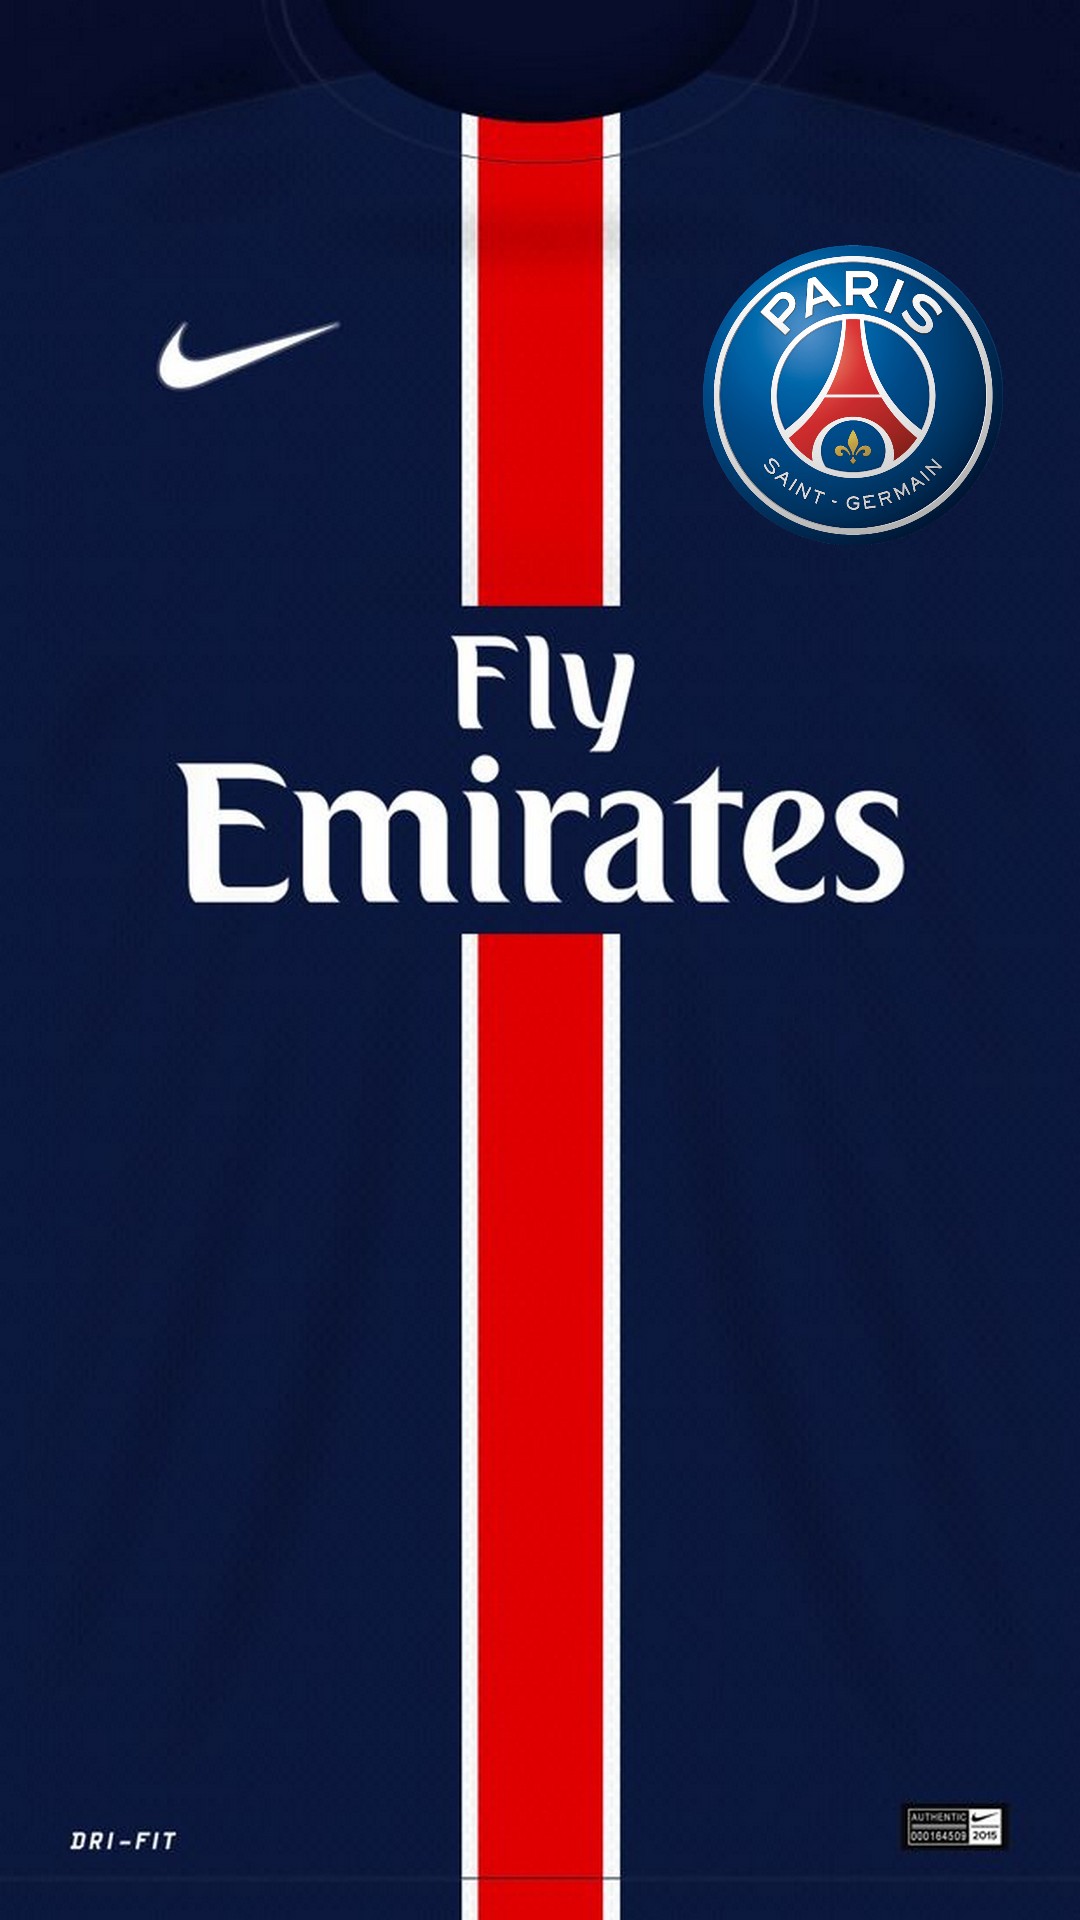 iPhone Wallpaper HD Paris Saint-Germain with resolution 1080x1920 pixel. You can make this wallpaper for your Mac or Windows Desktop Background, iPhone, Android or Tablet and another Smartphone device